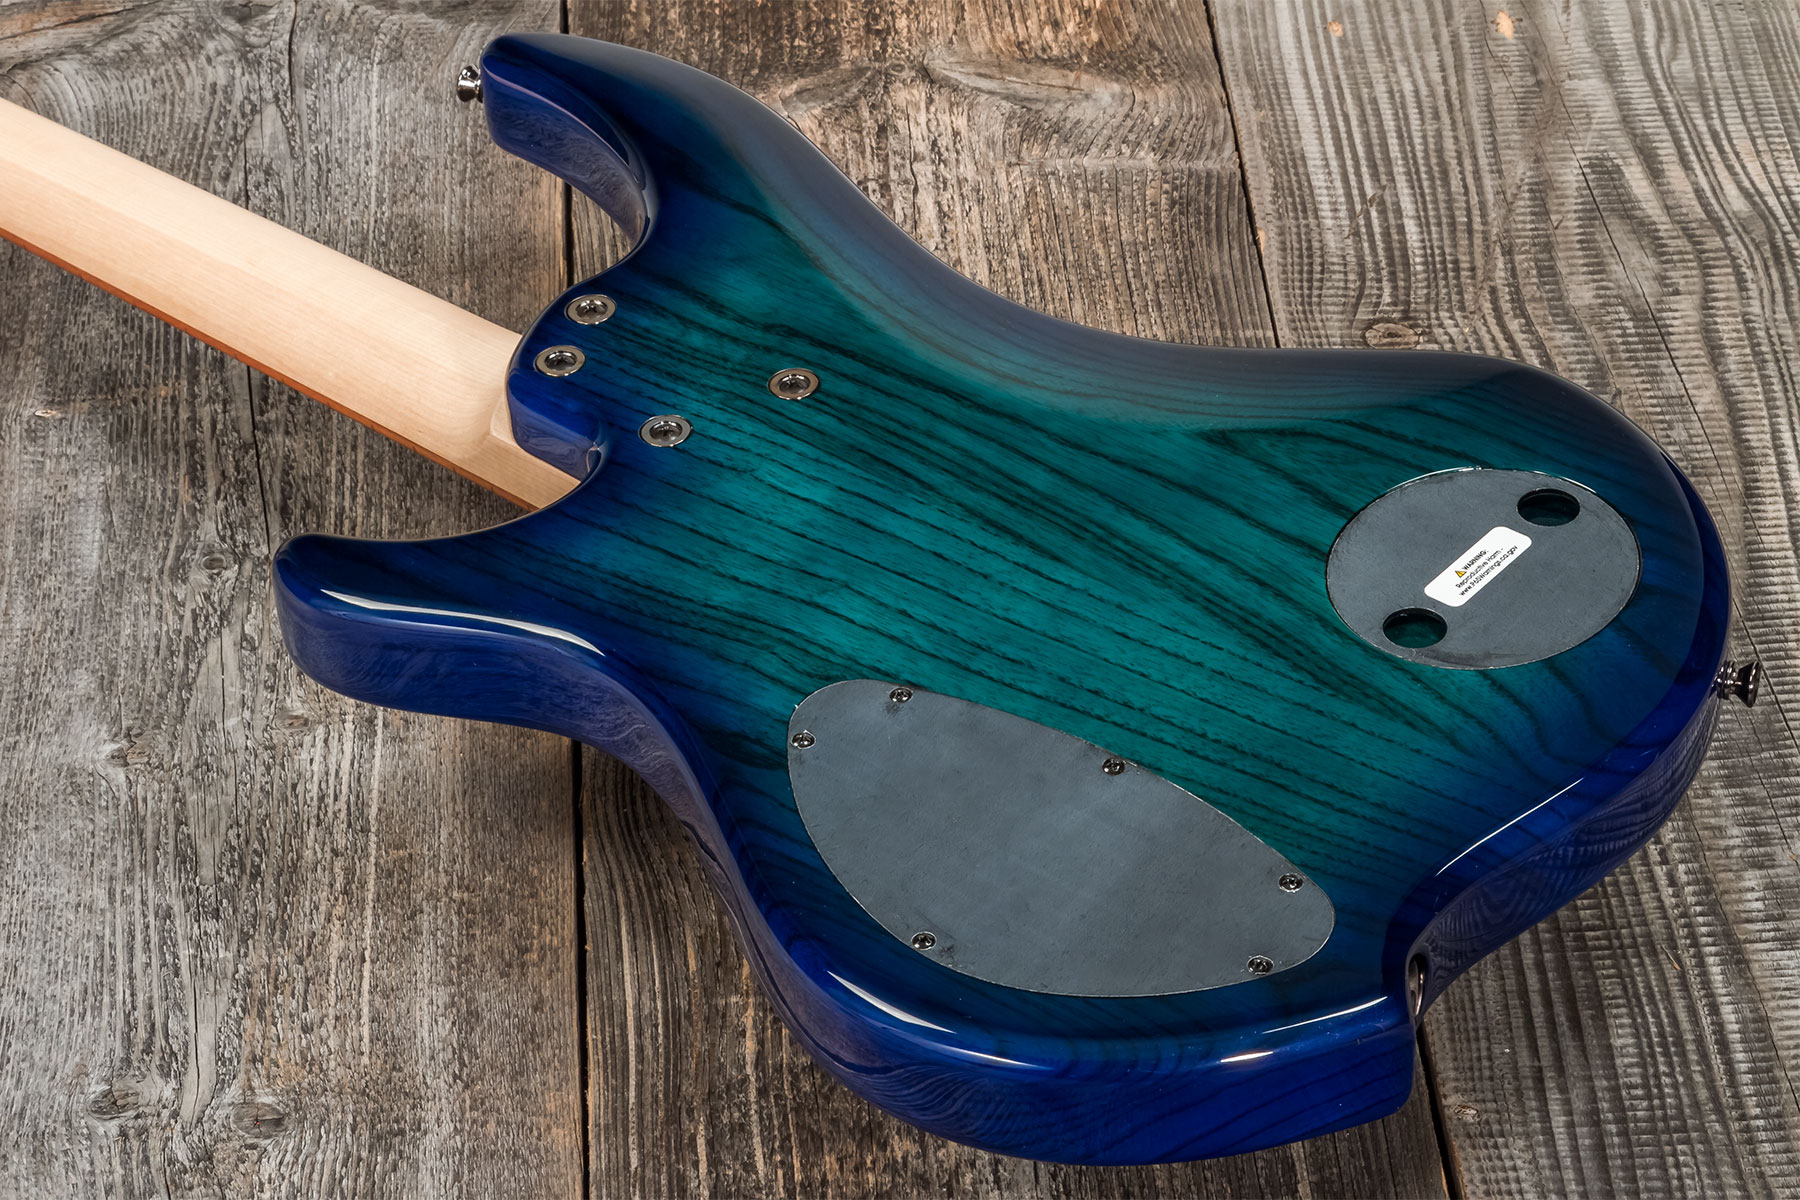 Dingwall Combustion Cb2 4c 2pu Active Pf - Whalepool Burst - Solid body electric bass - Variation 5